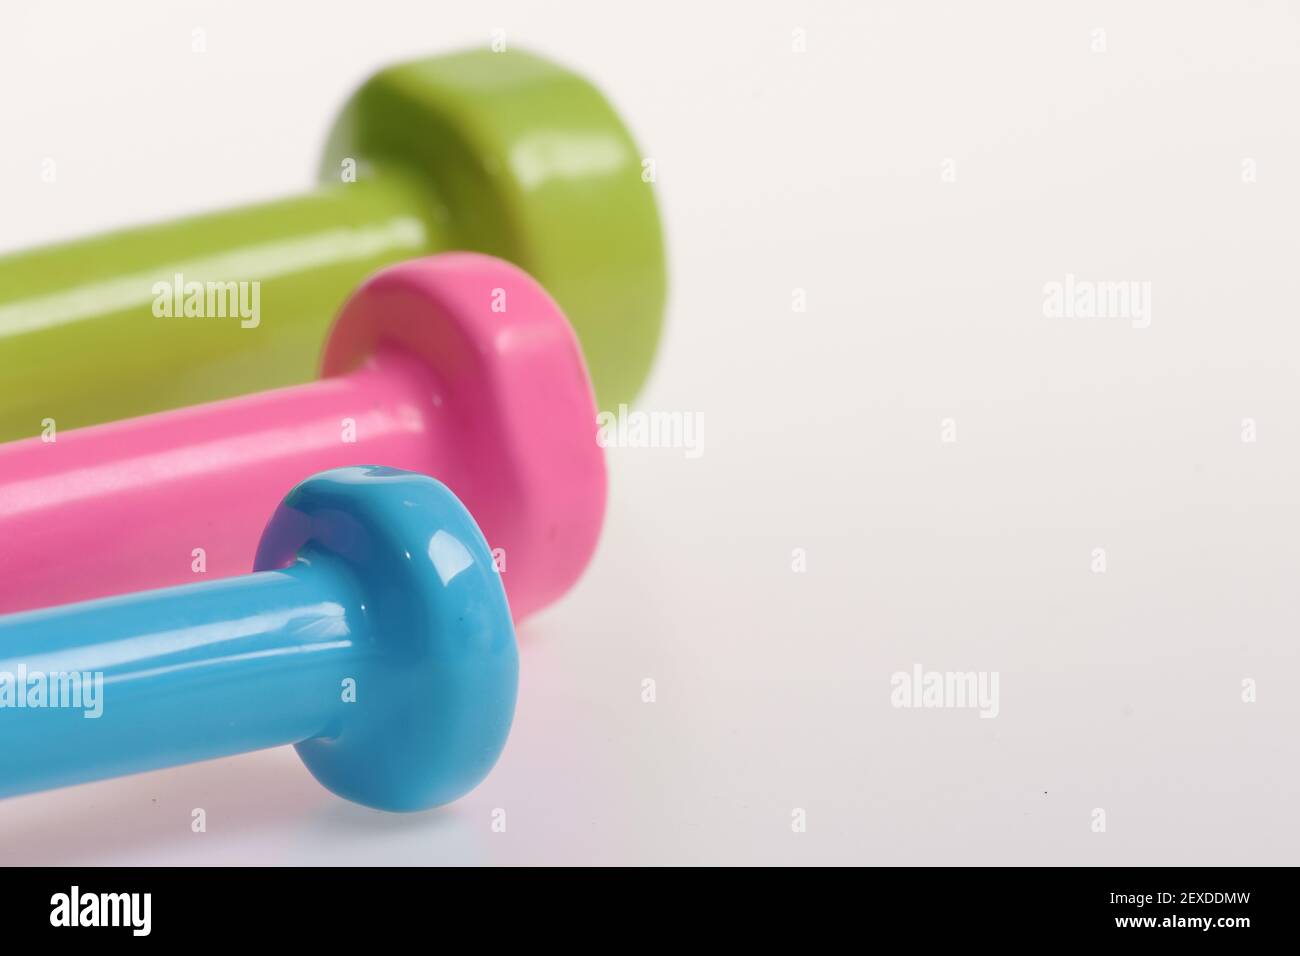 Sport regime and fitness symbols. Barbells in pink, green and blue colors,  close up. Healthy lifestyle